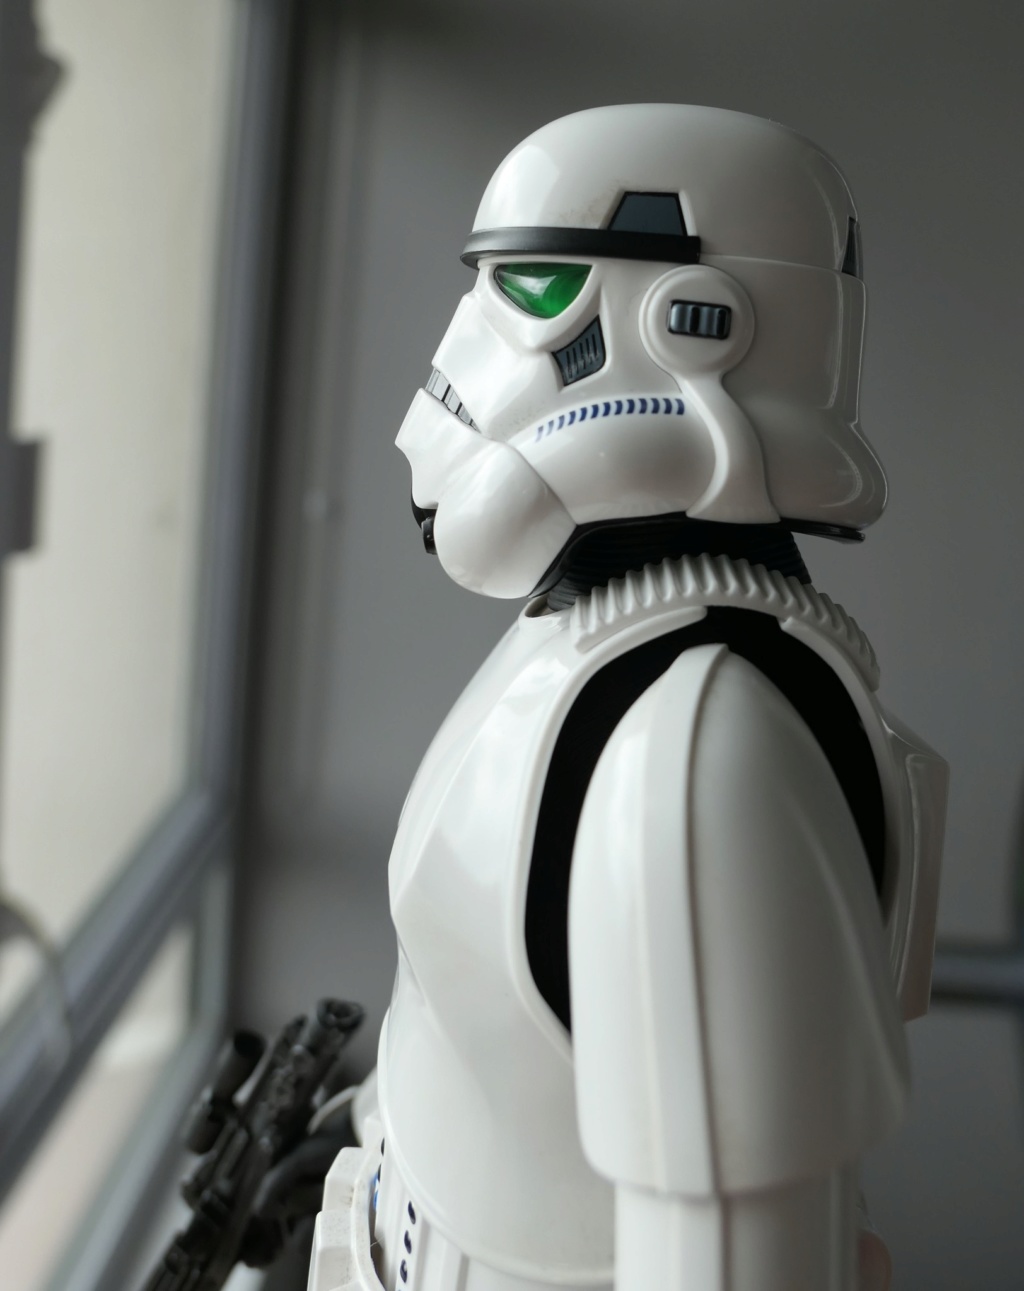 male - NEW PRODUCT: HOT TOYS: STAR WARS STORMTROOPER (DELUXE VERSION) 1/6TH SCALE COLLECTIBLE FIGURE 2h6slc10